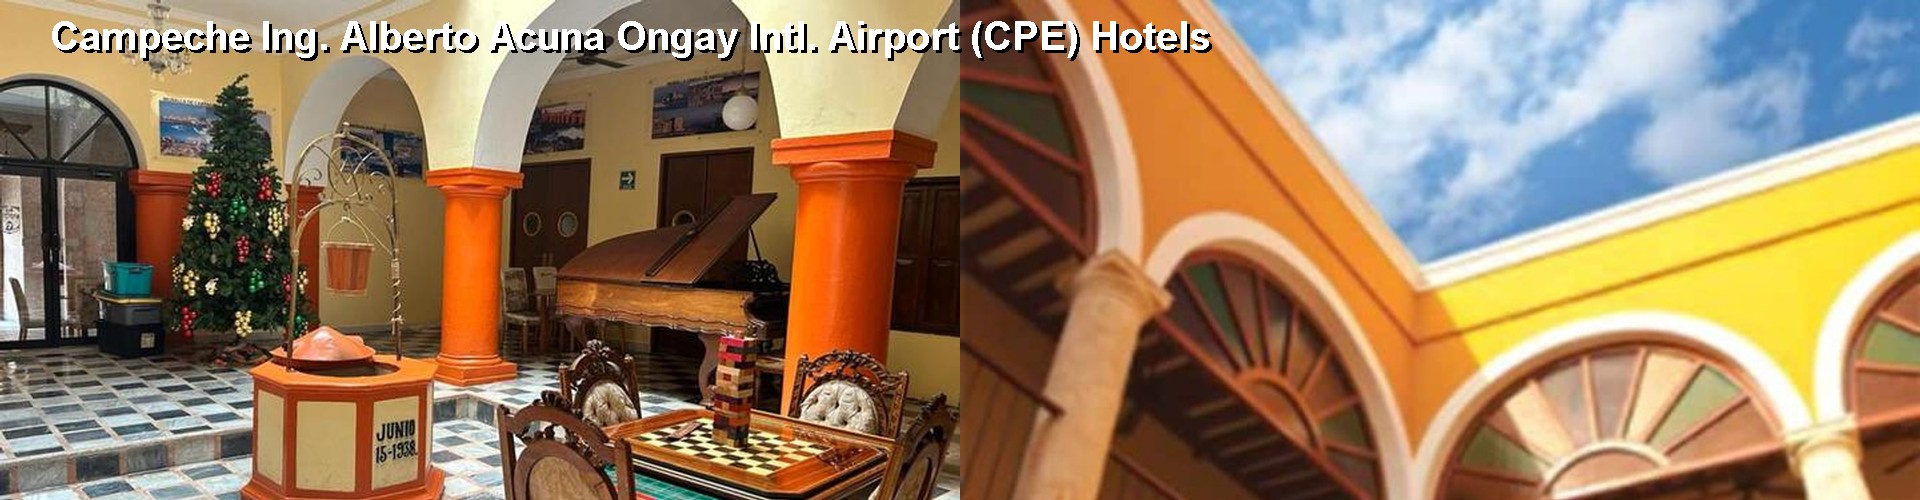 5 Best Hotels near Campeche Ing. Alberto Acuna Ongay Intl. Airport (CPE)